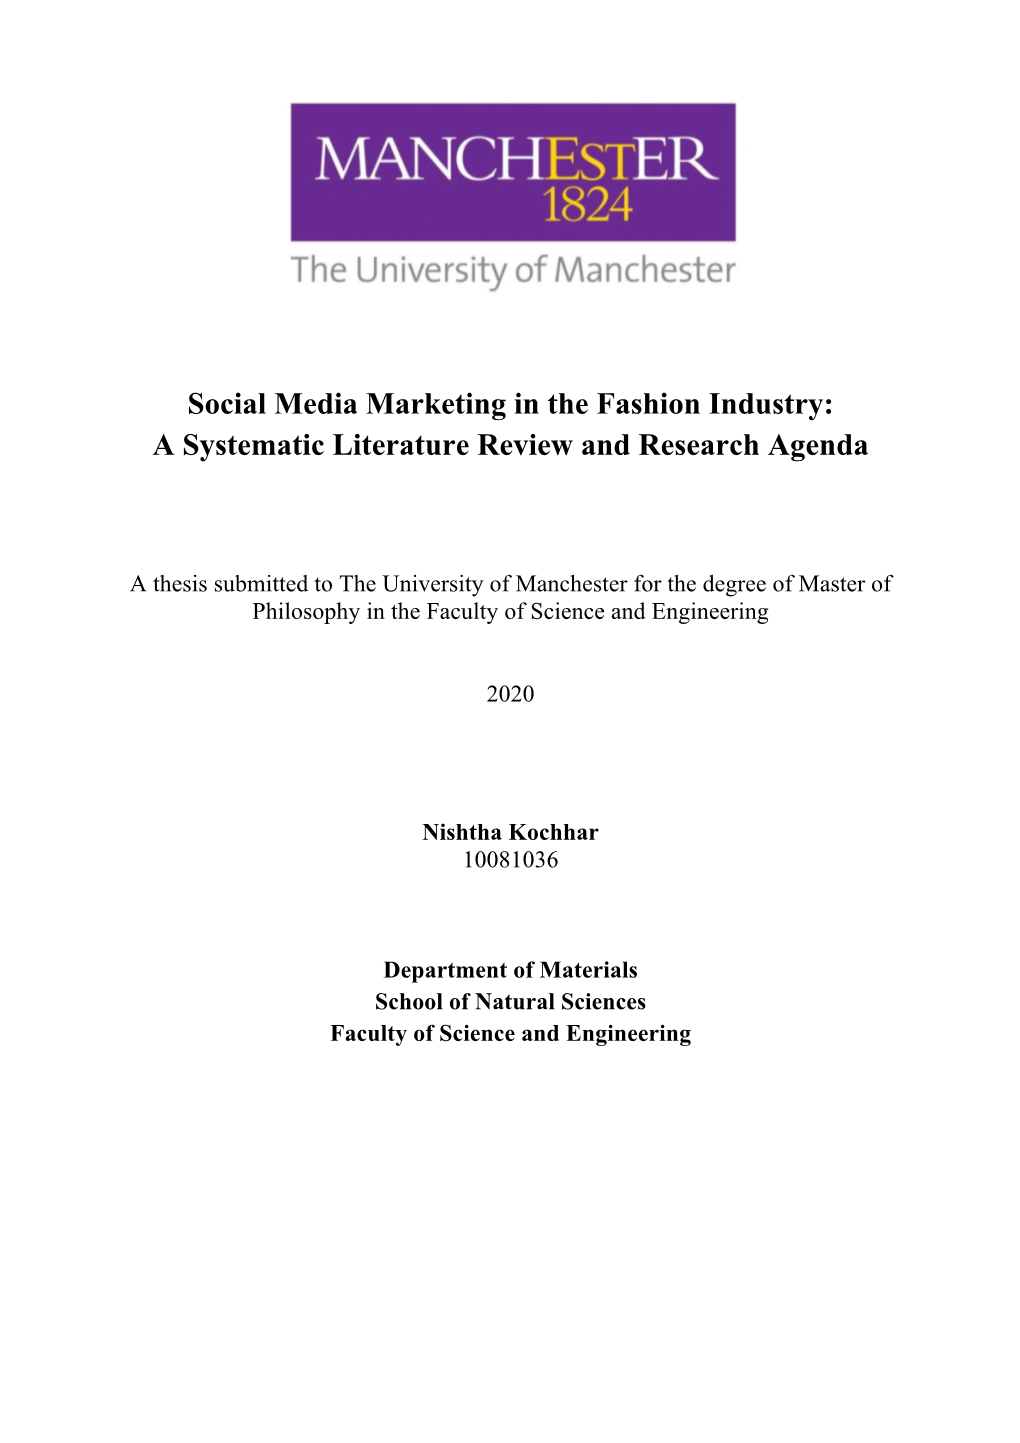 Social Media Marketing in the Fashion Industry: a Systematic Literature Review and Research Agenda